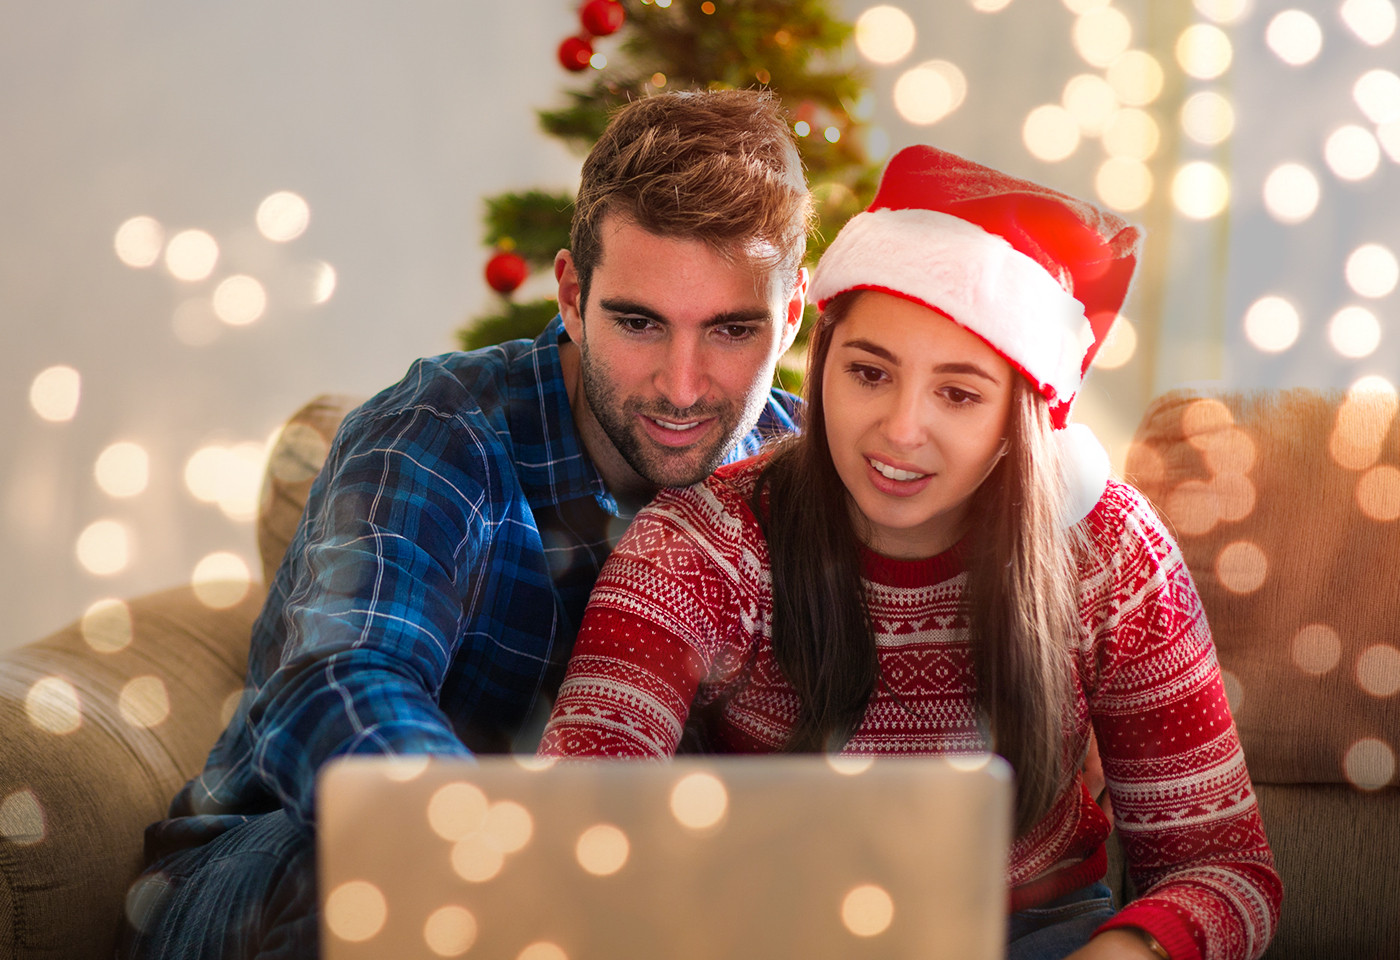 Christmas Loans - The Best Way For Buy The Best Gifts | ShinyLoans